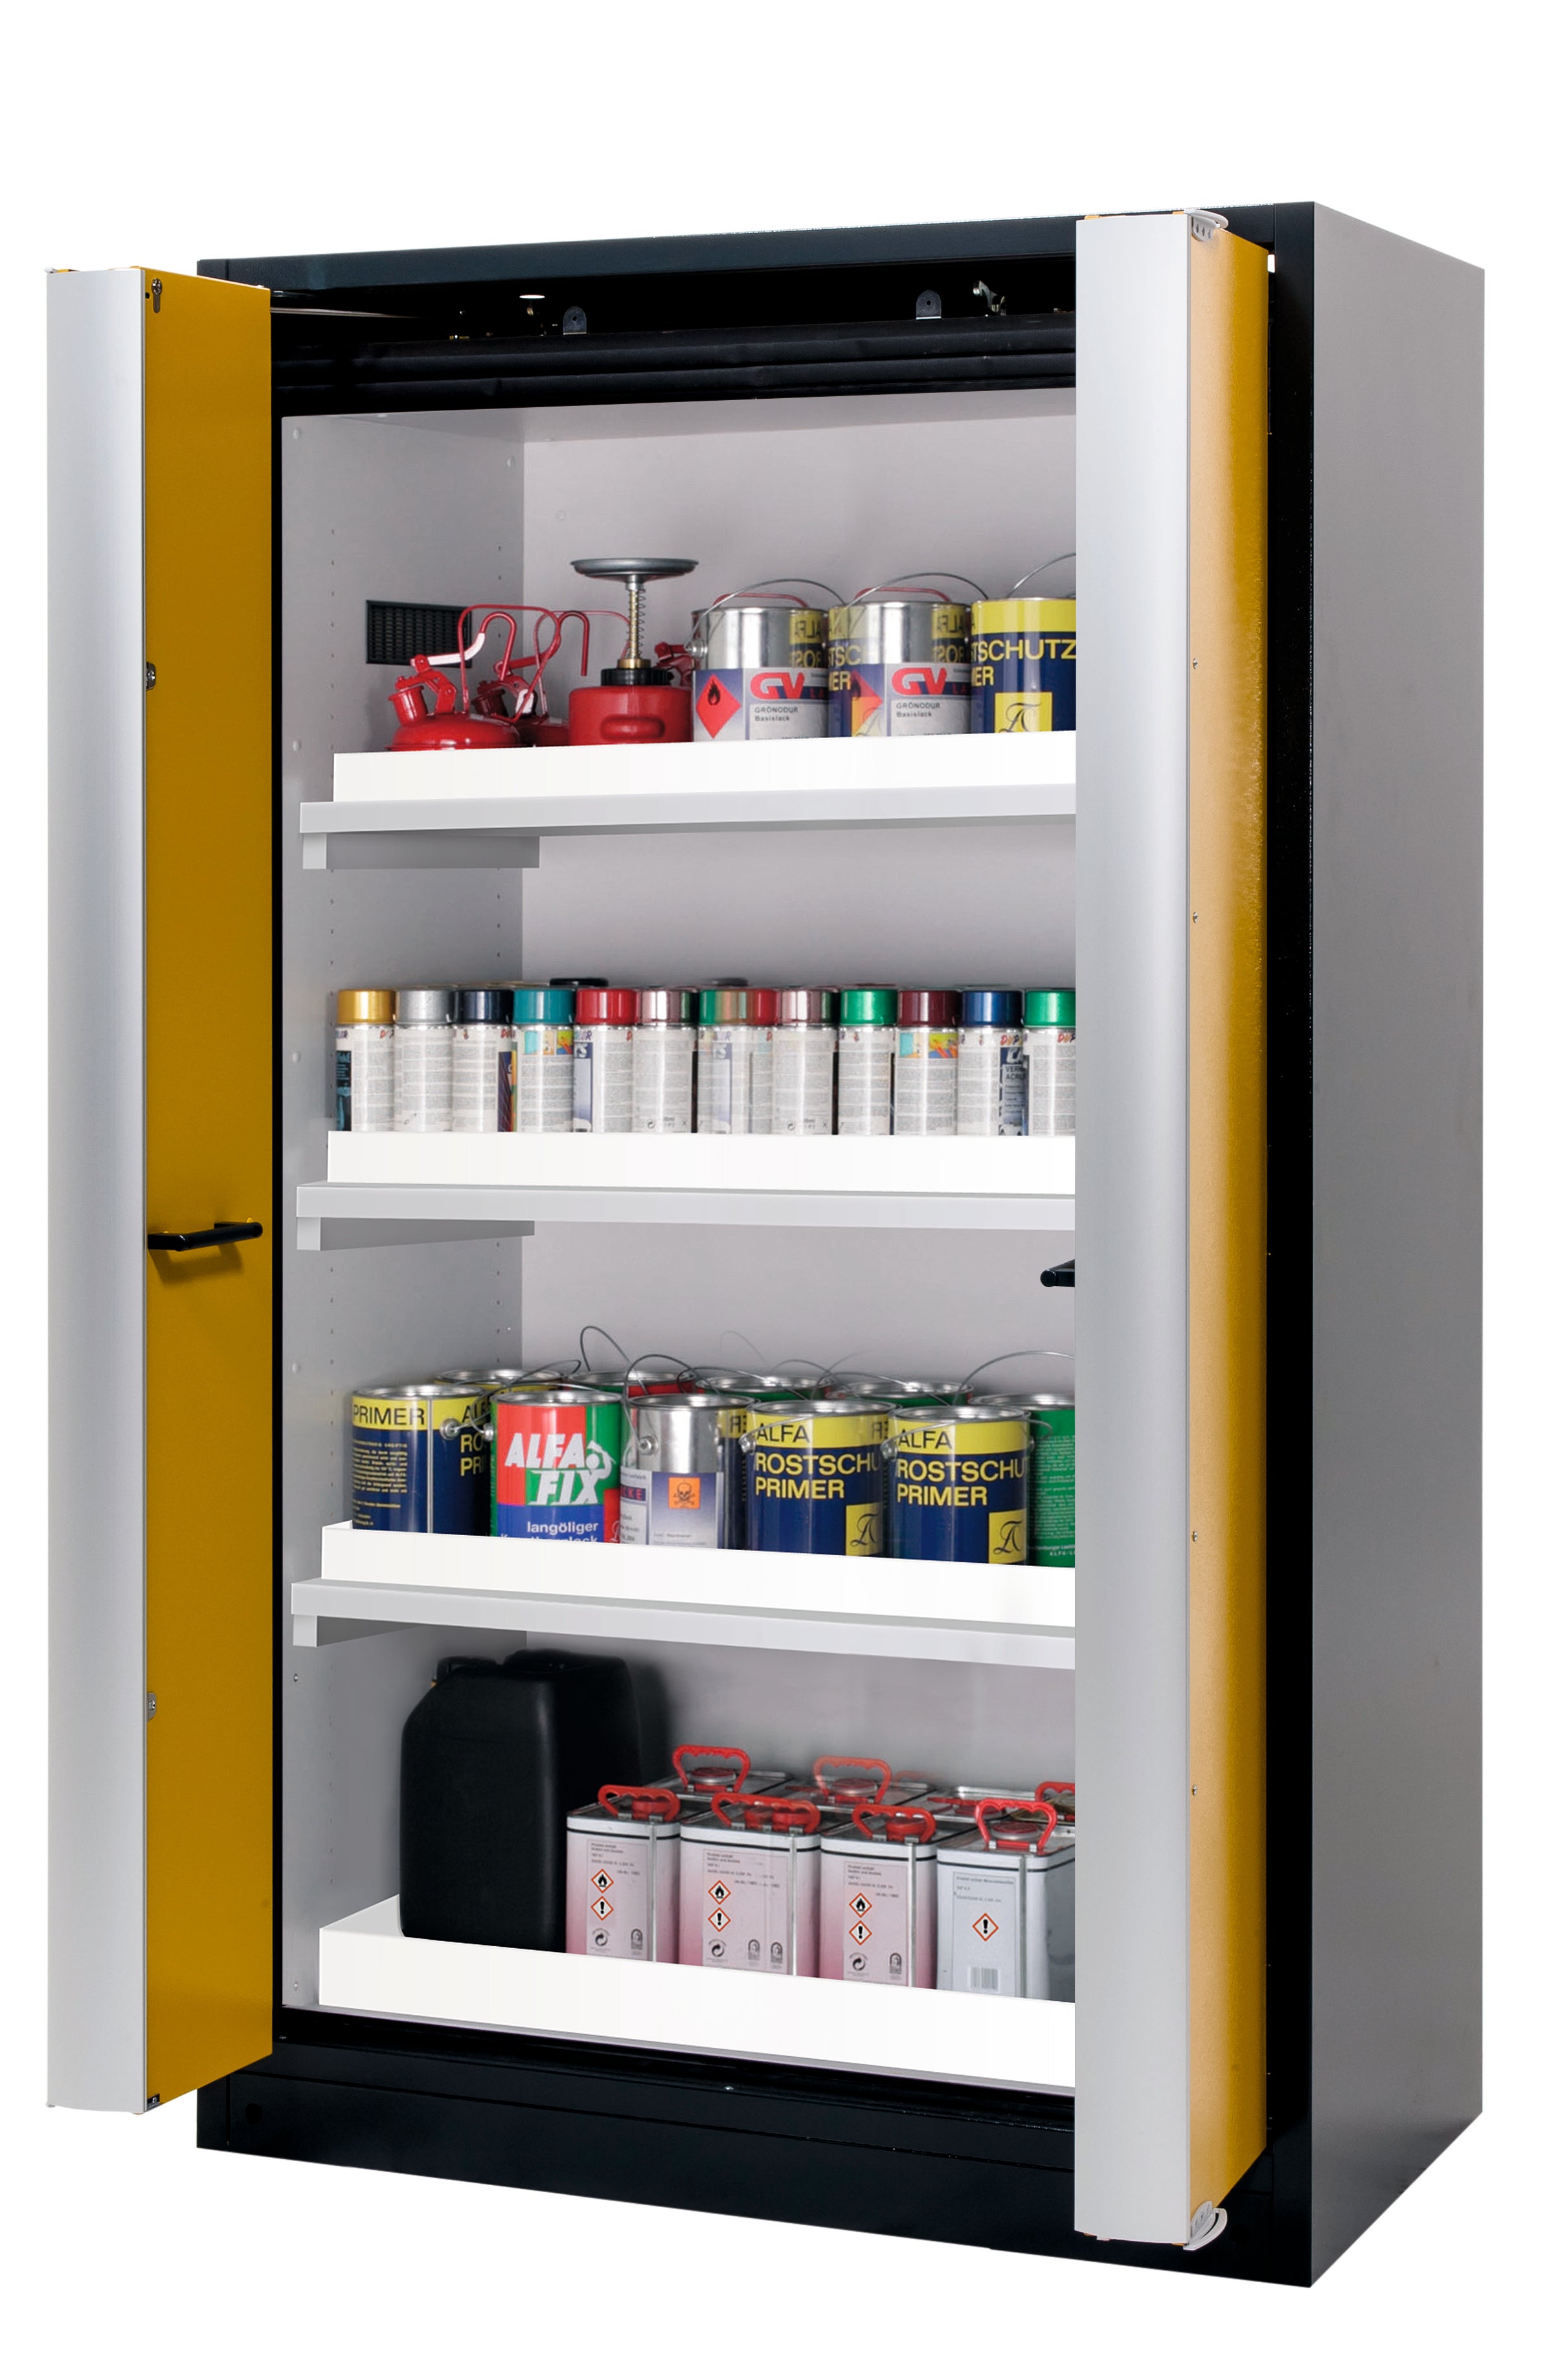 Type 90 safety cabinet Q-PHOENIX-90 model Q90.195.120.FD in safety yellow RAL 1004 with 3x standard tray base (polypropylene)